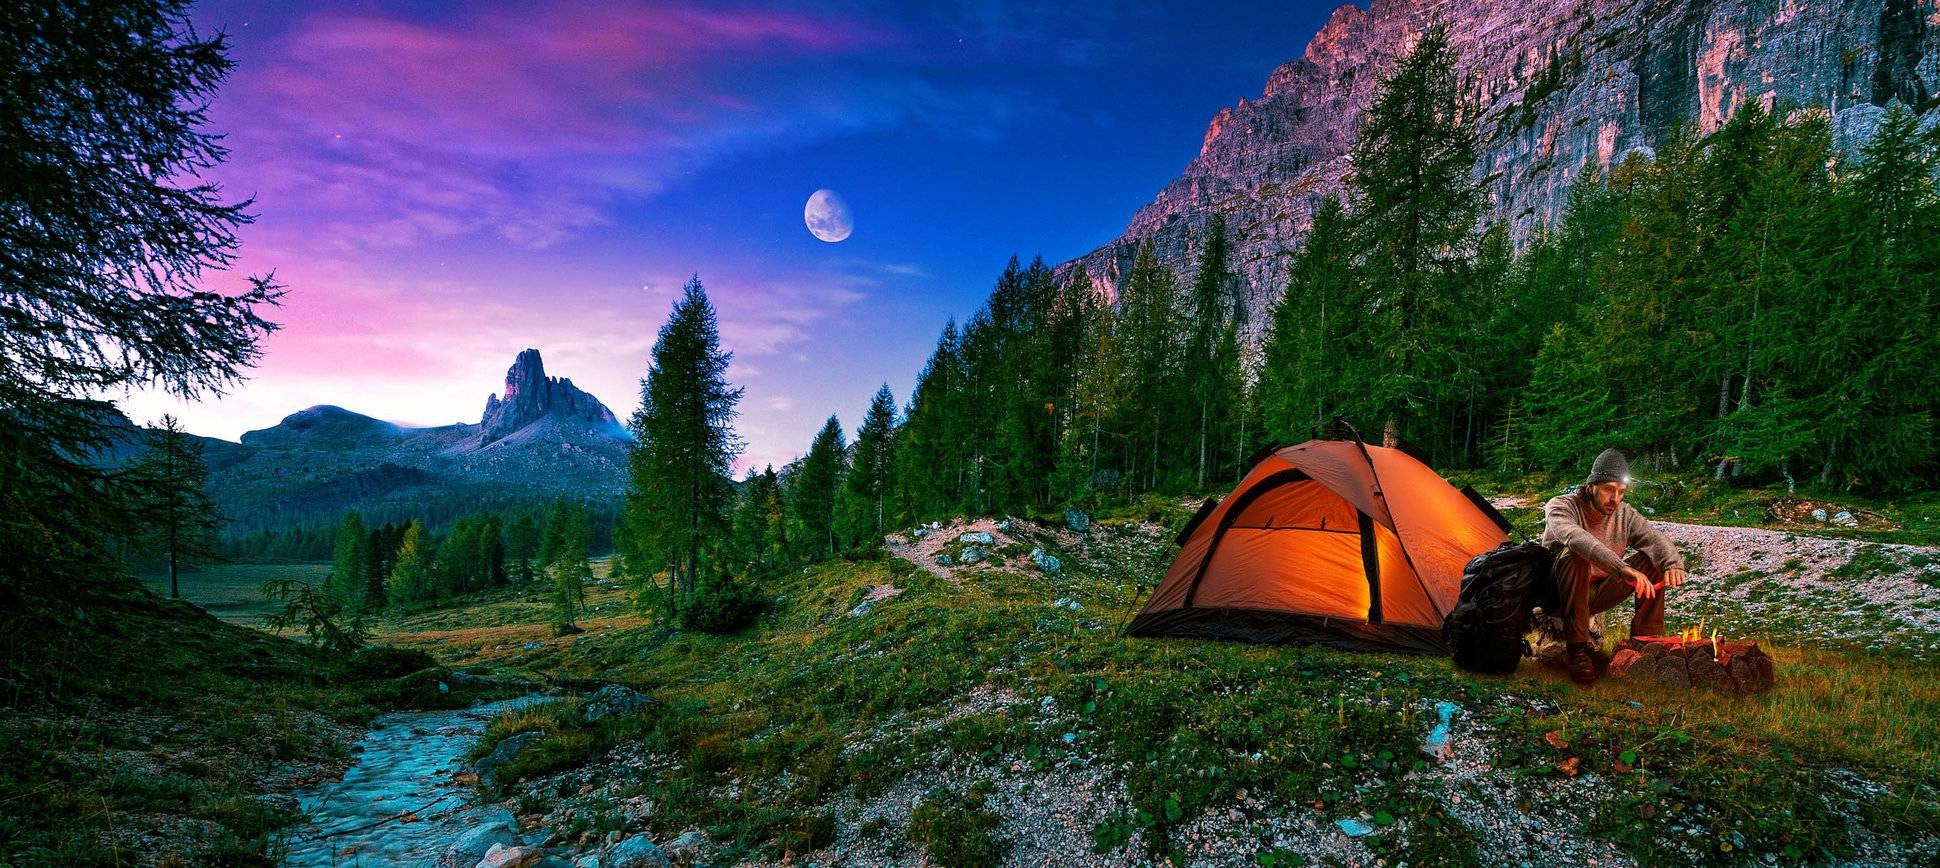 Fun Summer Friday Ideas camping in the woods